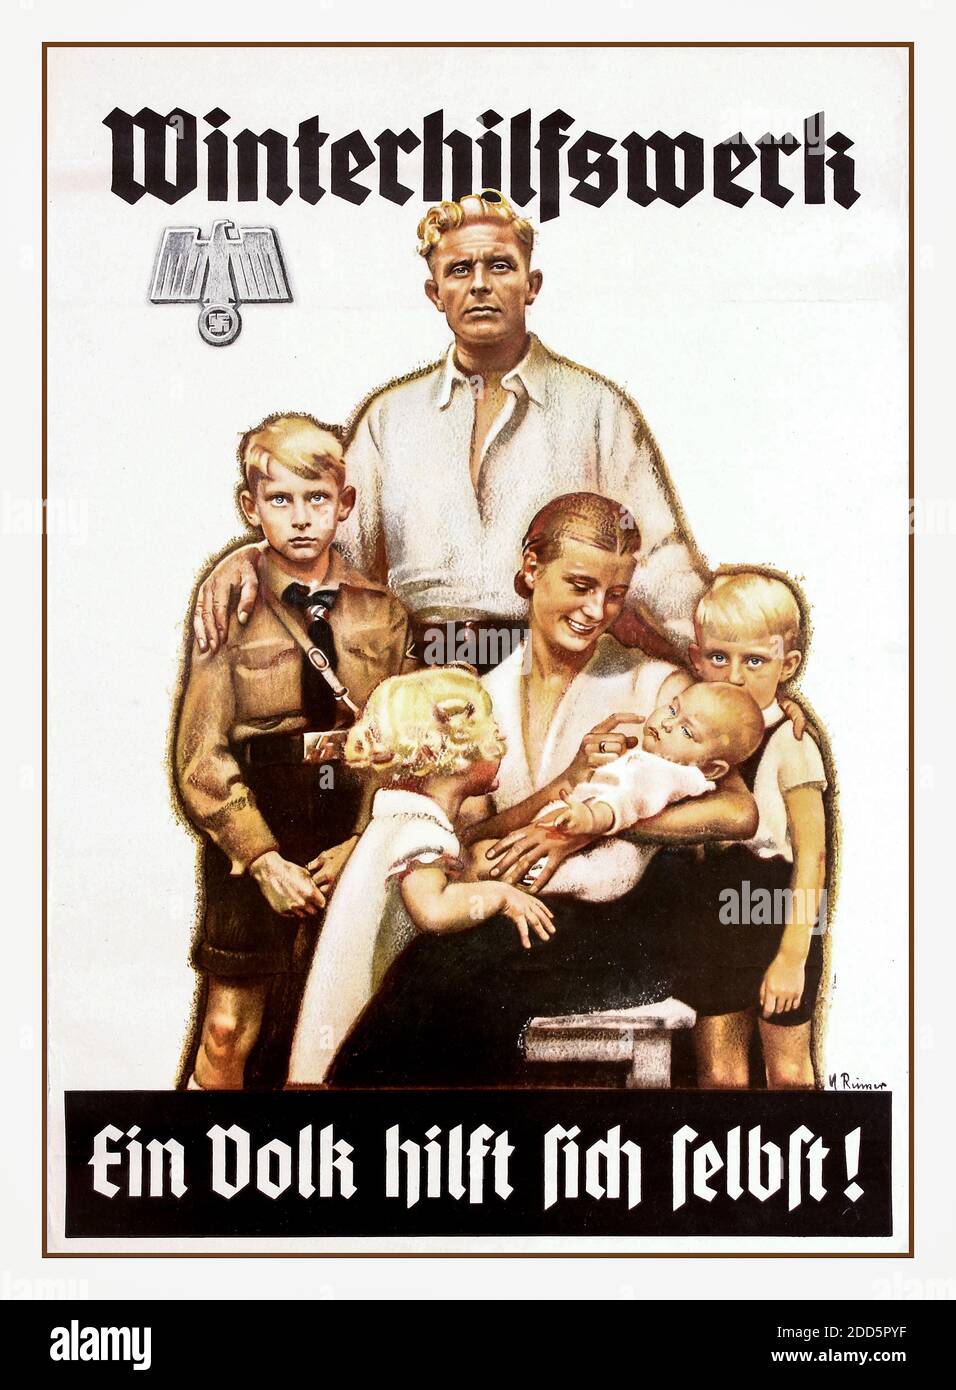 Nazi Propaganda original vintage poster WINTERHILFSWERK - EIN VOLK HILFT SICH SELBST! WINTER RELIEF WORK - A PEOPLE HELPS ITSELF. Image of an ideal Aryan family with eagle holding a swastika in the top left corner. The Winterhilfswerk des Deutschen Volkes (English: 'Winter Relief of the German People'), commonly known by its abbreviated form Winterhilfswerk or WHW, was an annual drive by the Nationalsozialistische Volkswohlfahrt (National Socialist People’s Welfare Organization) to help finance charitable work in the Third Reich. Its slogan was 'None shall starve or freeze'.Germany. Year 1930 Stock Photo